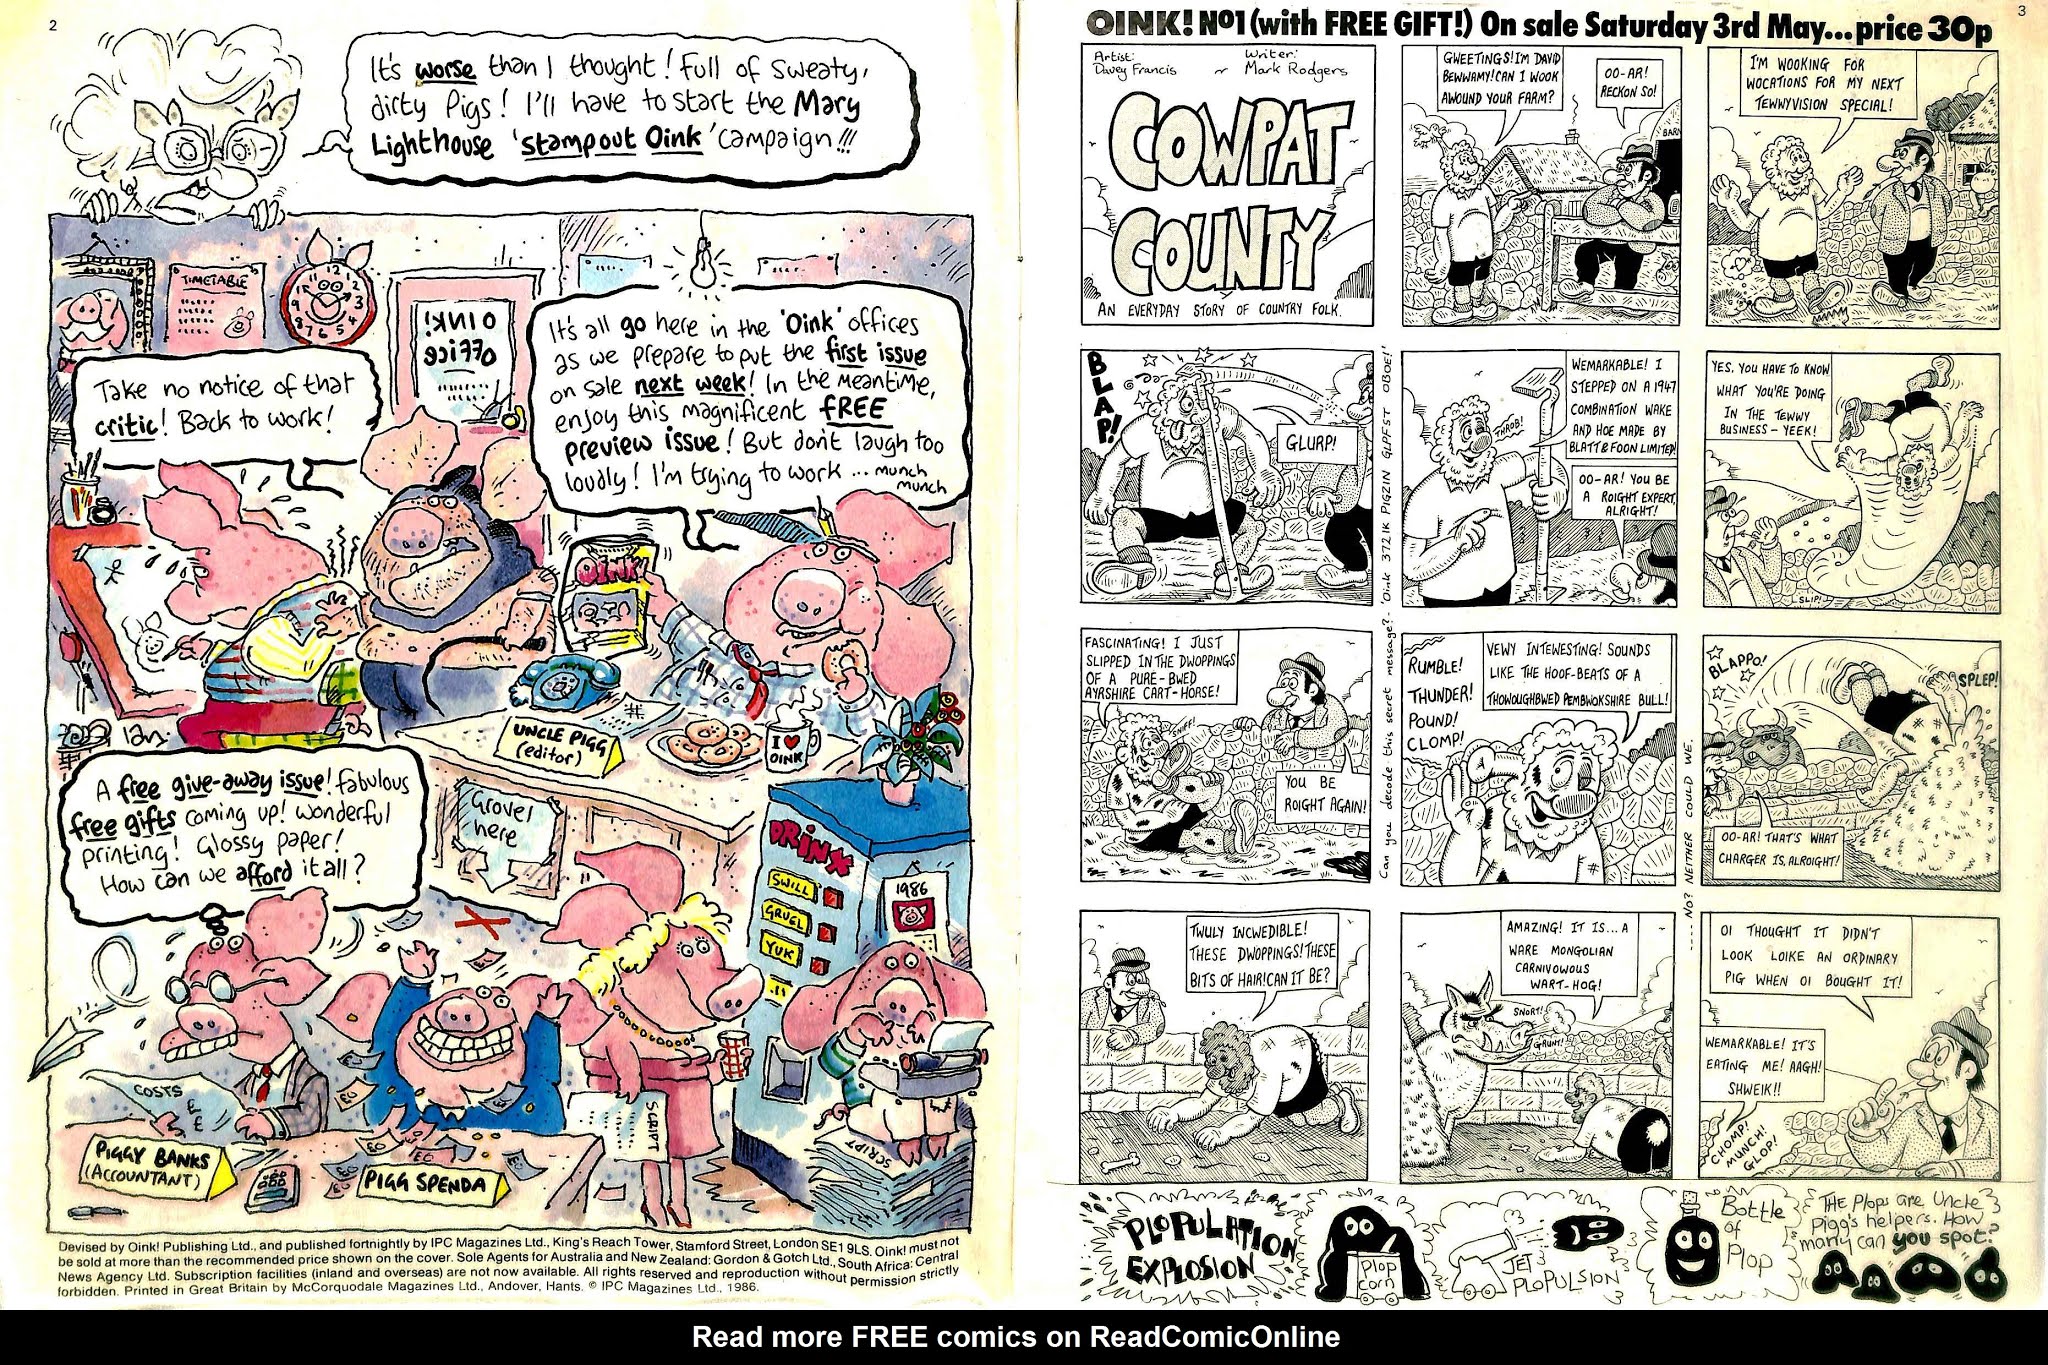 Read online Oink! comic -  Issue #0 - 2